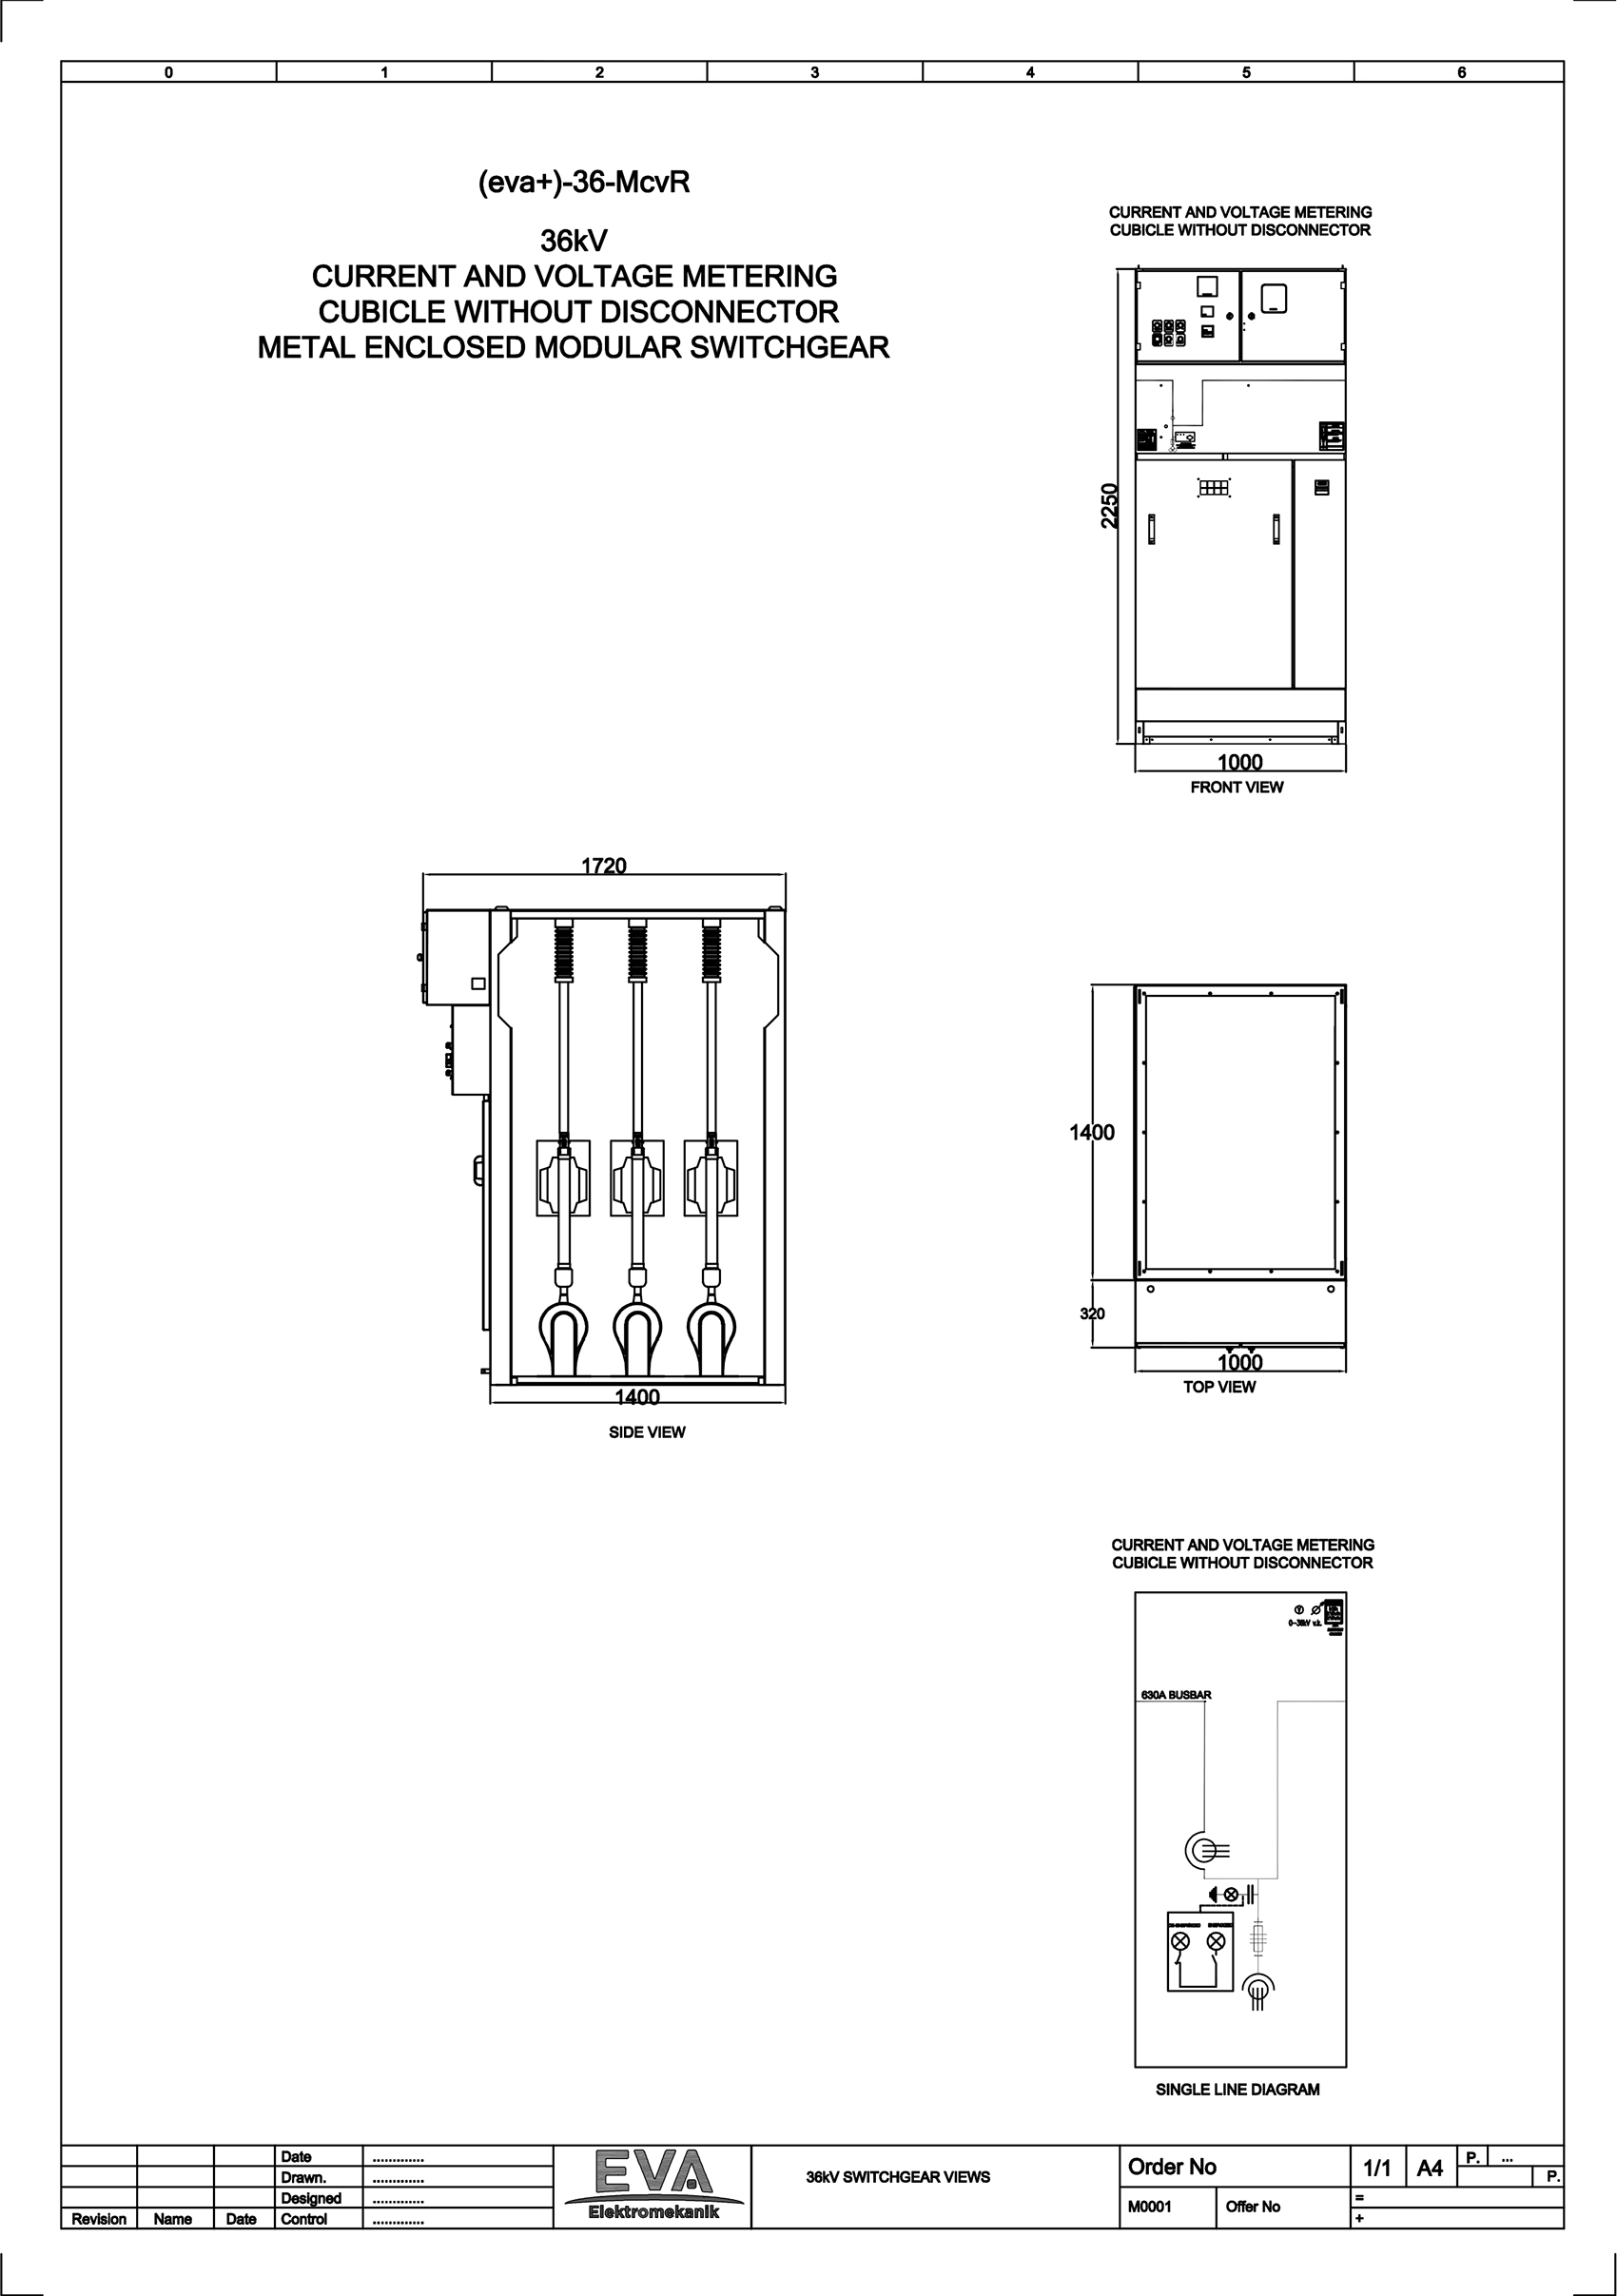 Current and Voltage Metering Cubicle without Disconnector	